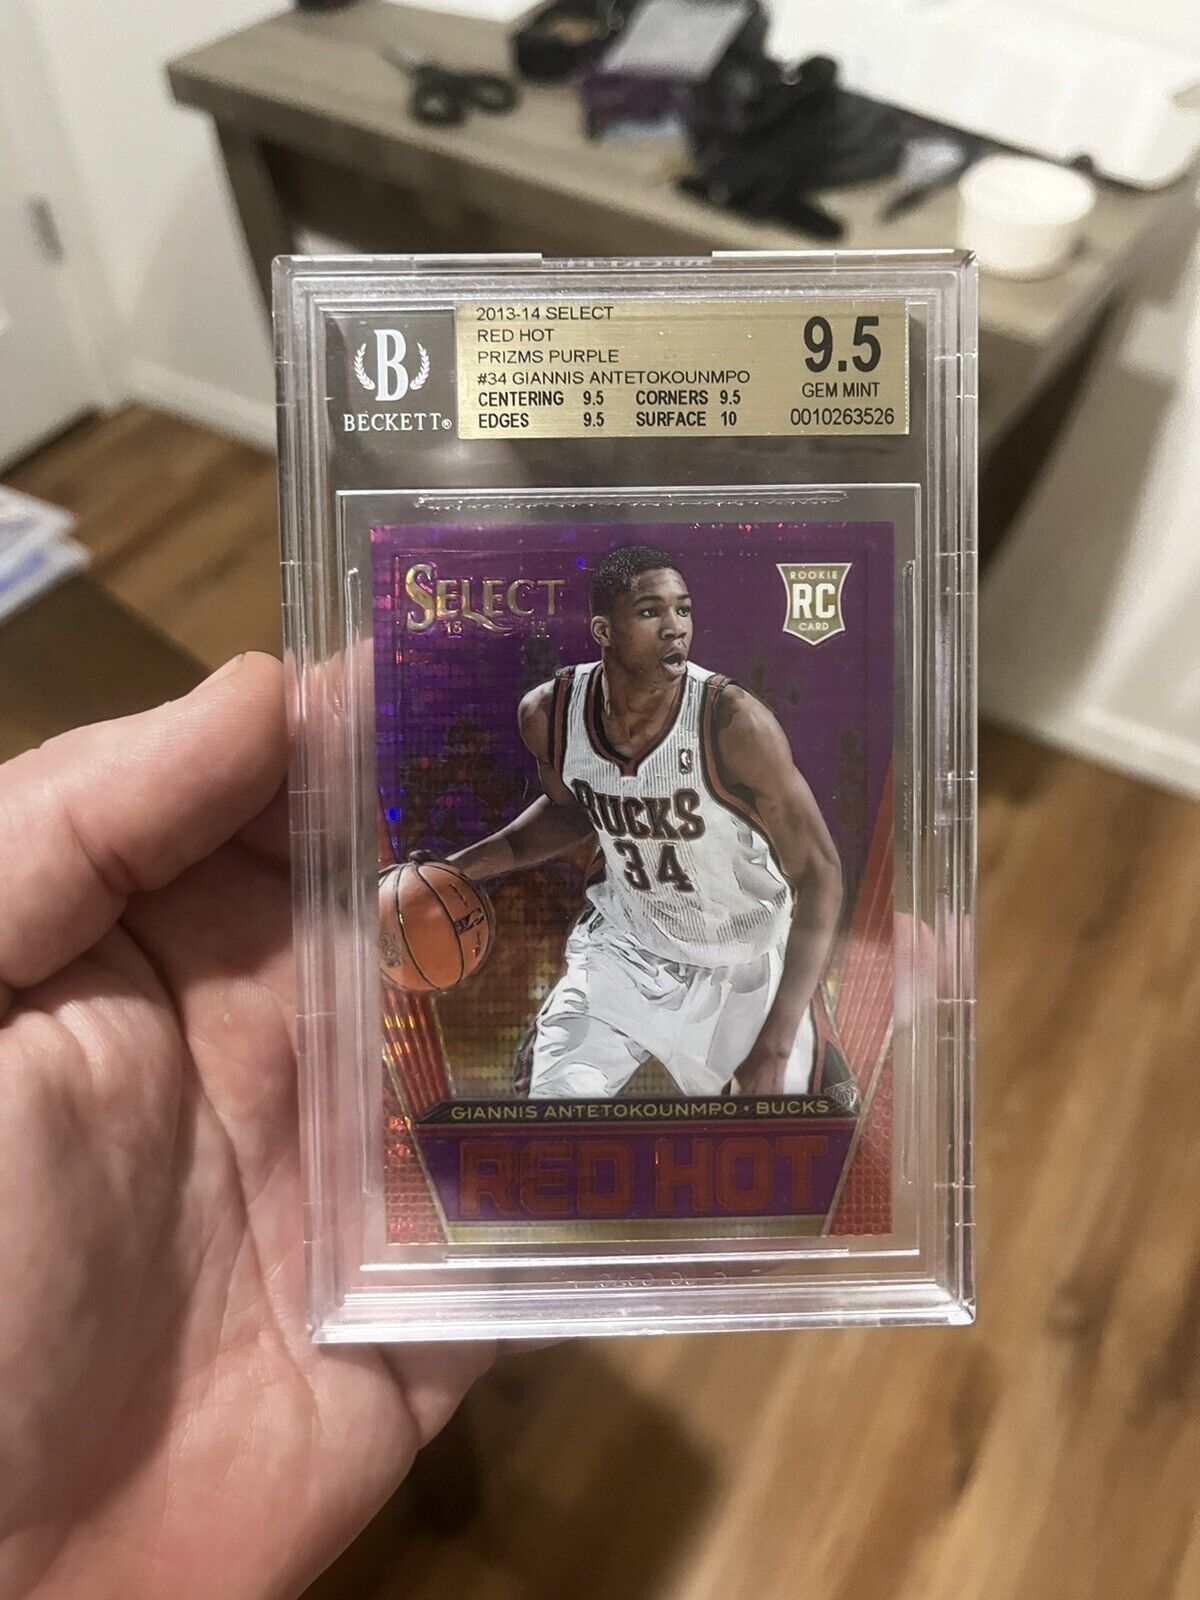 GIANNIS ANTETOKOUNMPO BGS 9.5 + 2013-14 SELECT RED HOT PURPLE PRIZM ROOKIE /99